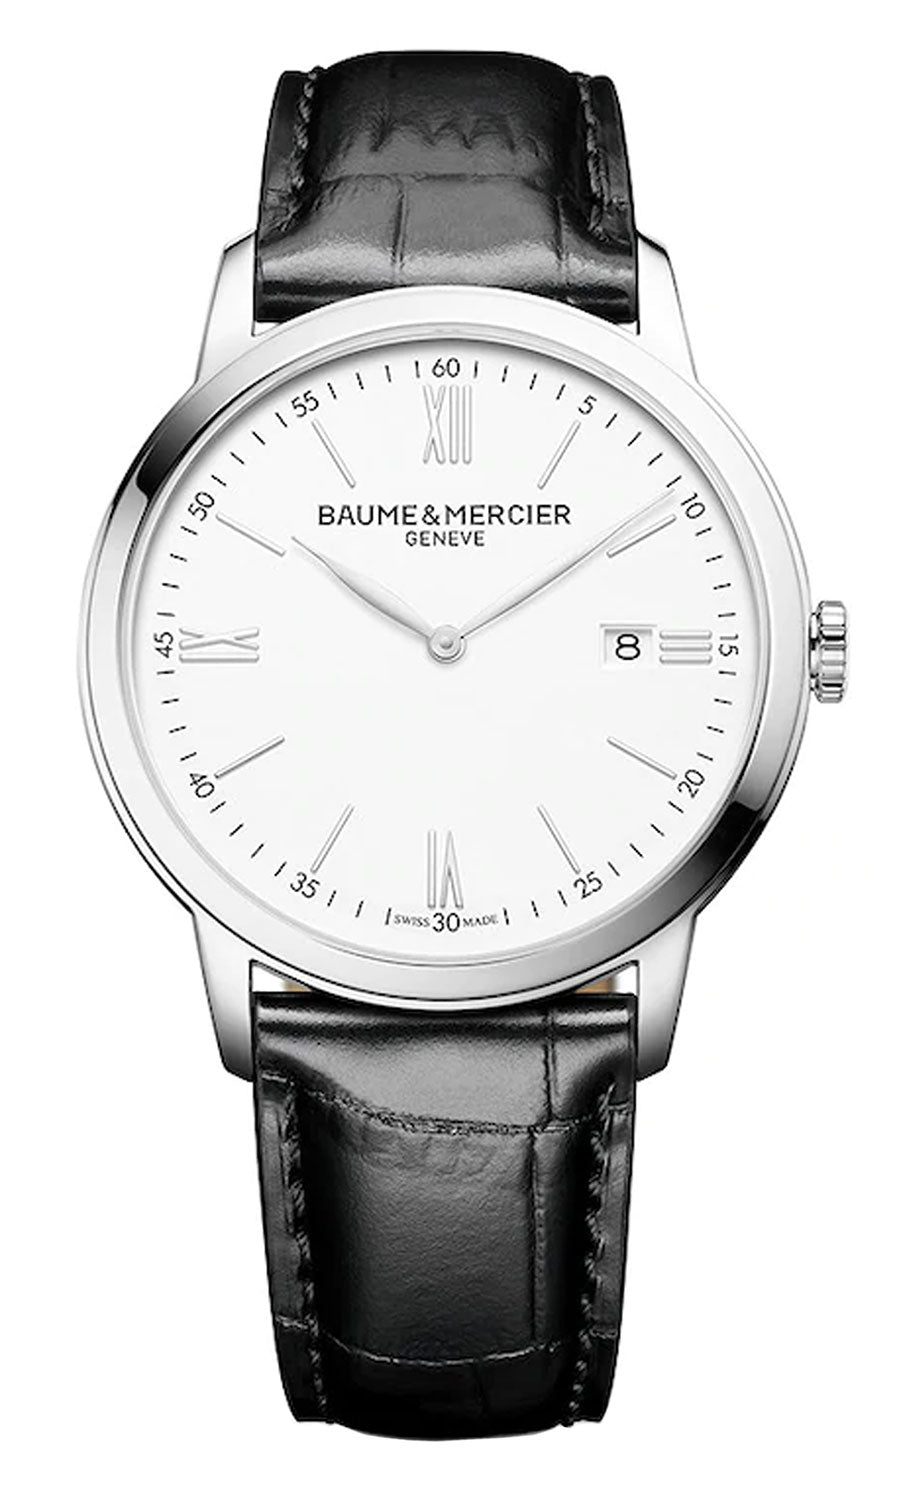 Watches - Mens-Baume & Mercier-M0A10414-40 - 45 mm, Baume & Mercier, Classima, date, leather, mens, menswatches, new arrivals, round, stainless steel case, swiss quartz, watches, white-Watches & Beyond